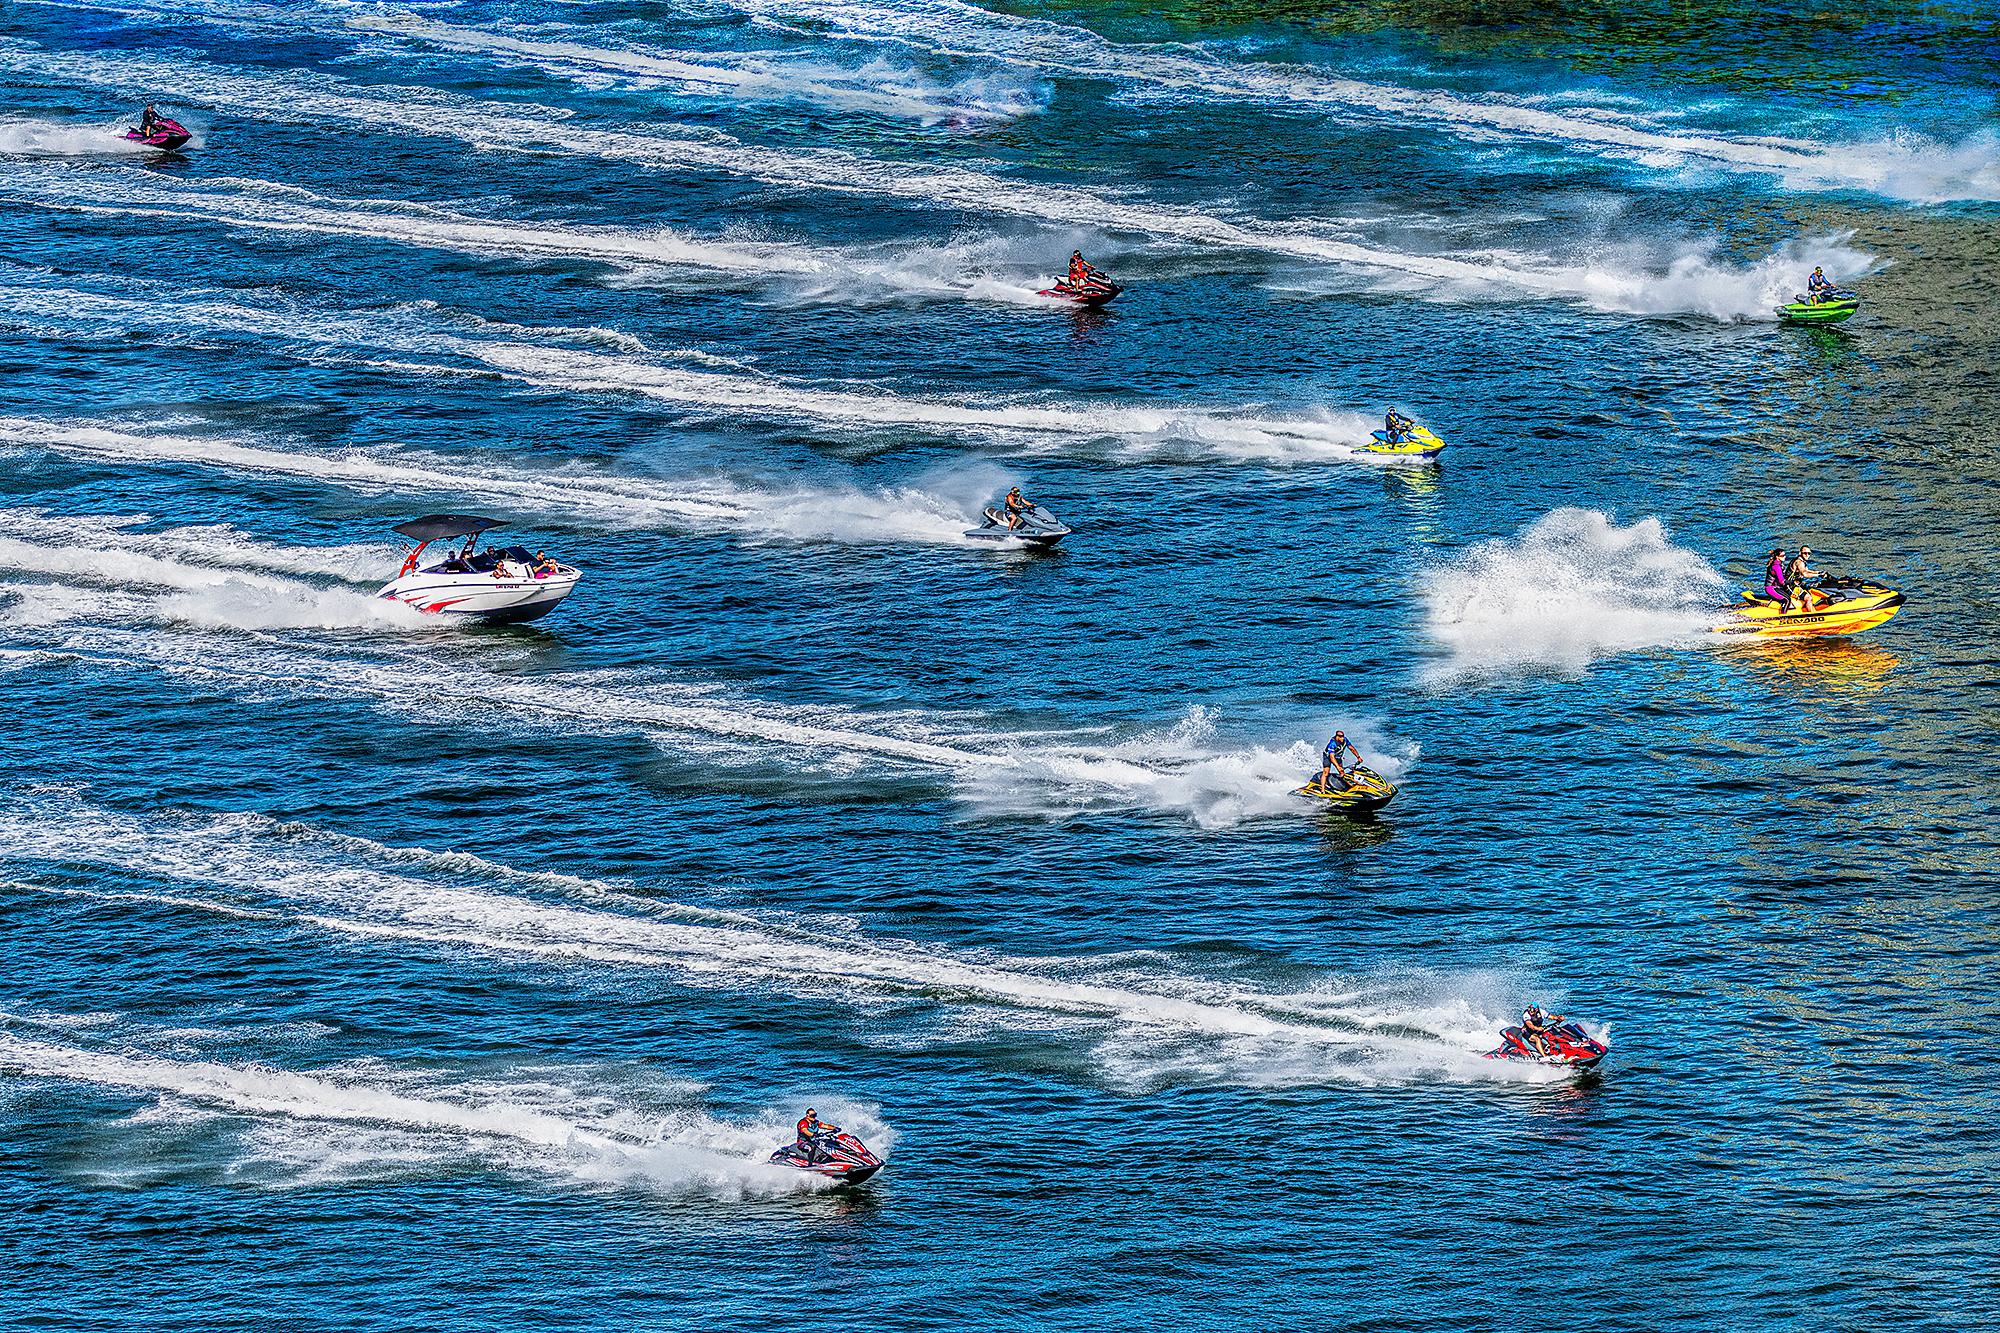 Mitchell Funk Abstract Photograph - Jet Ski Water Sport Action Wave Race in Blue Water